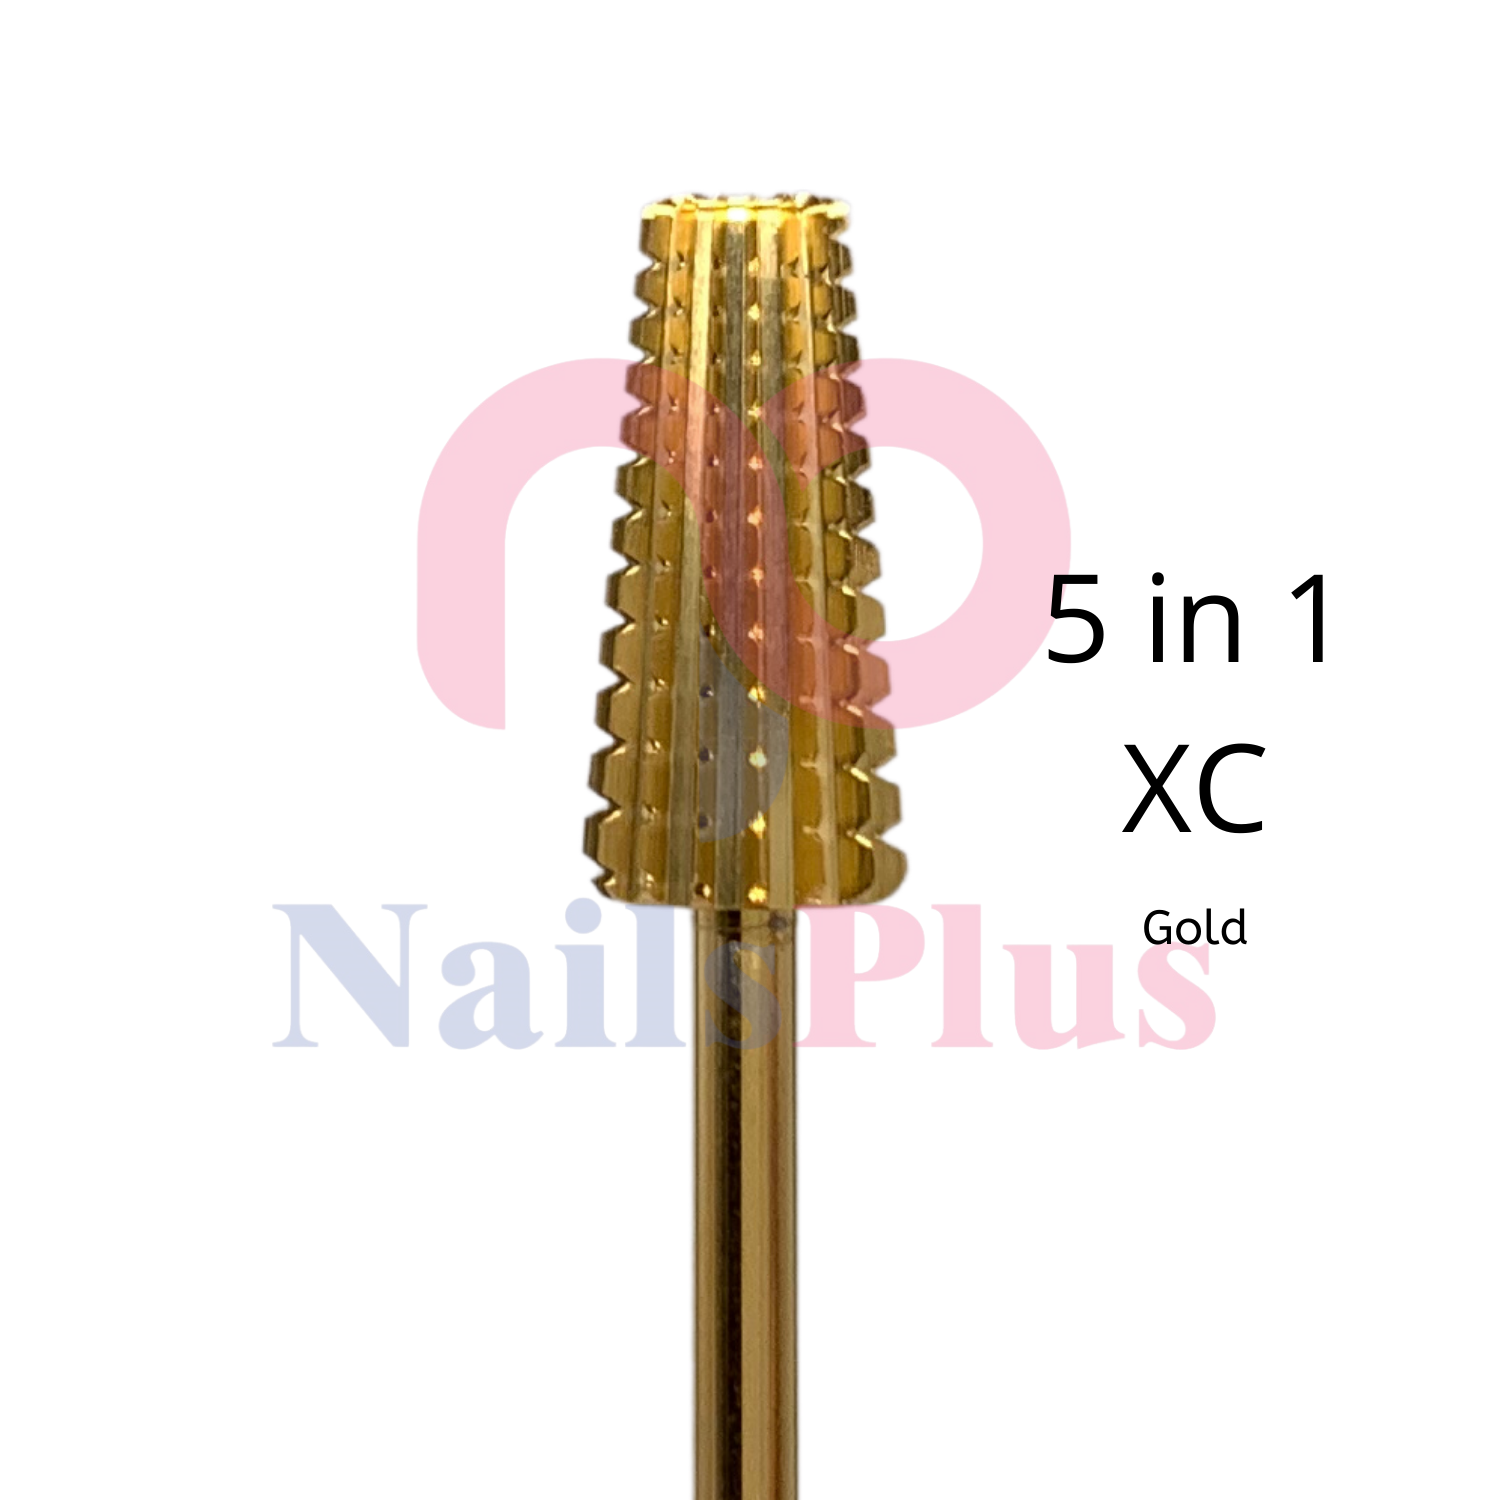 5 in 1 - XC - Gold